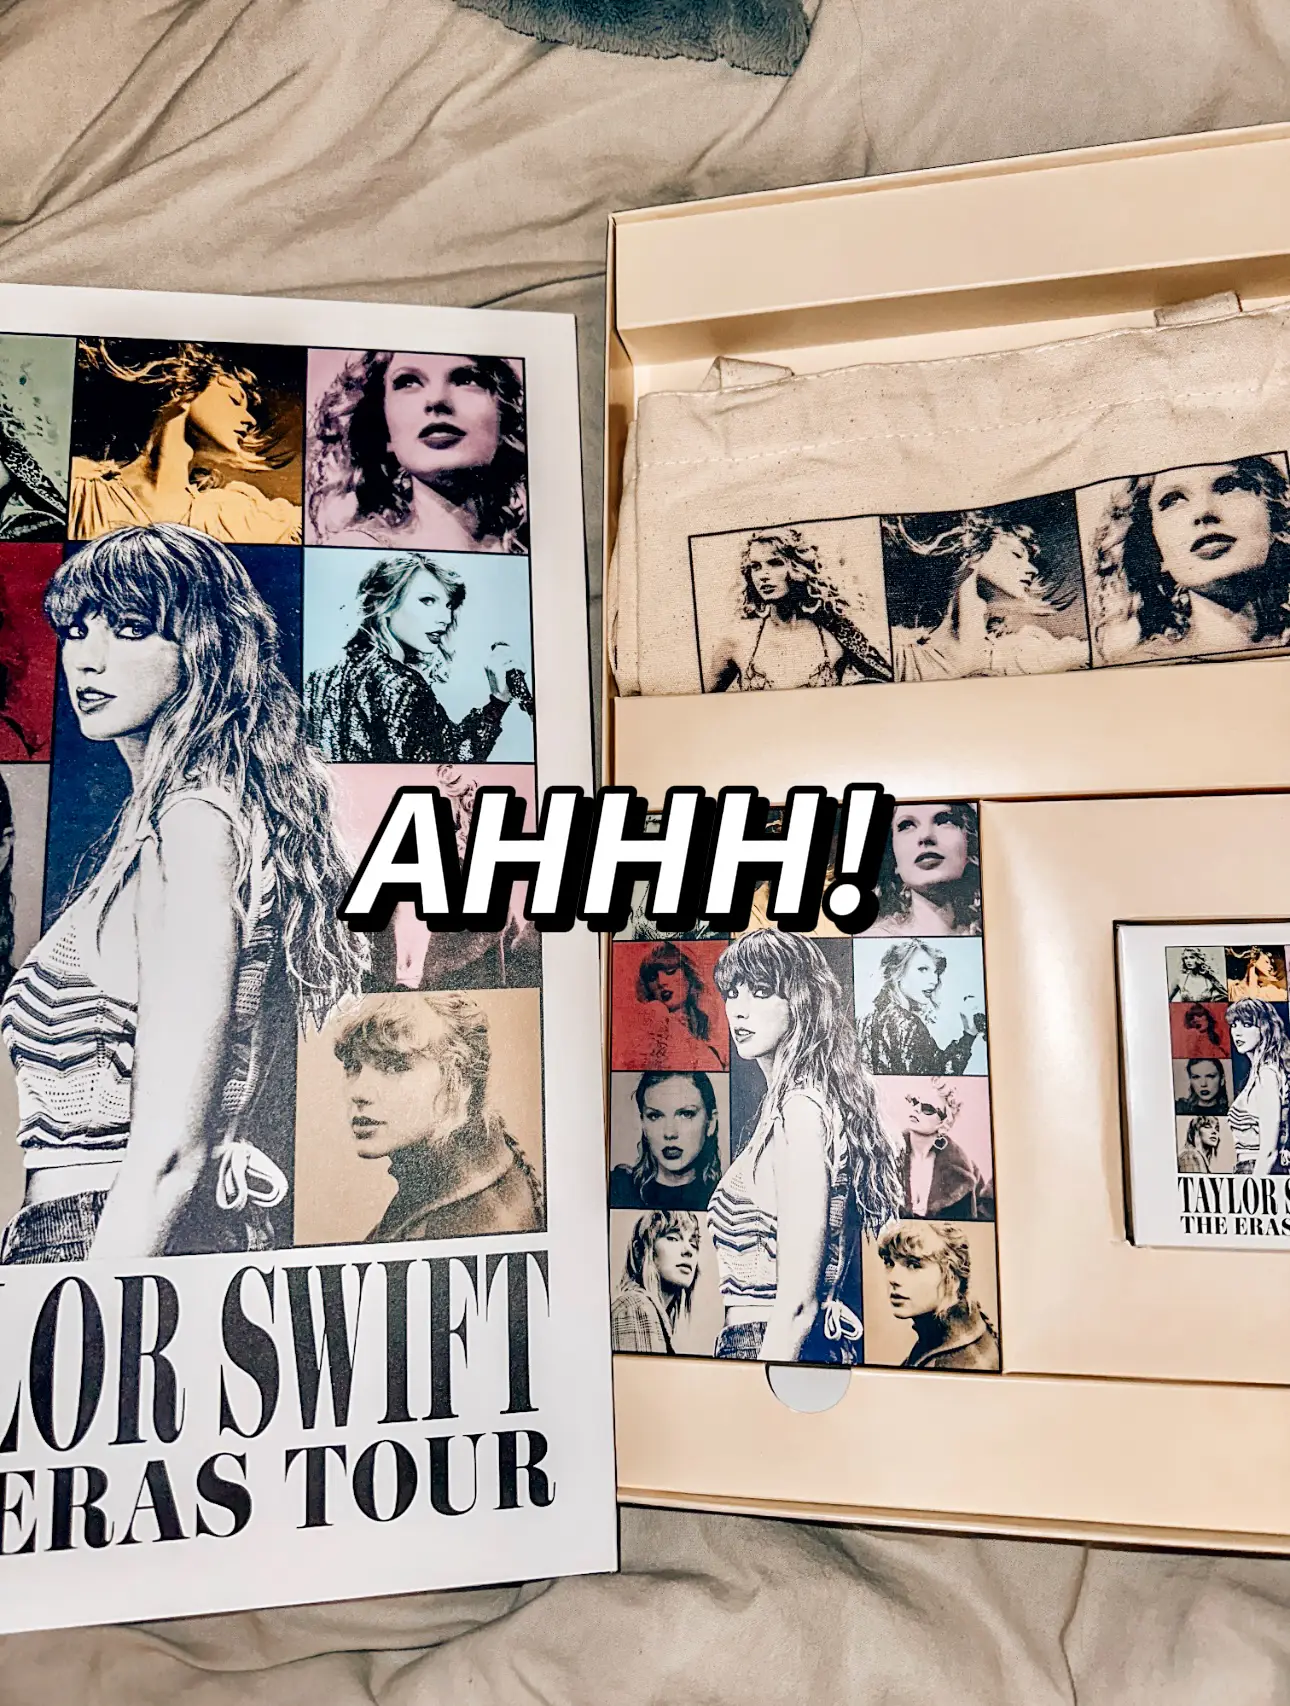 the eras tour poster, but taylor is happy!🫶 : r/TaylorSwift